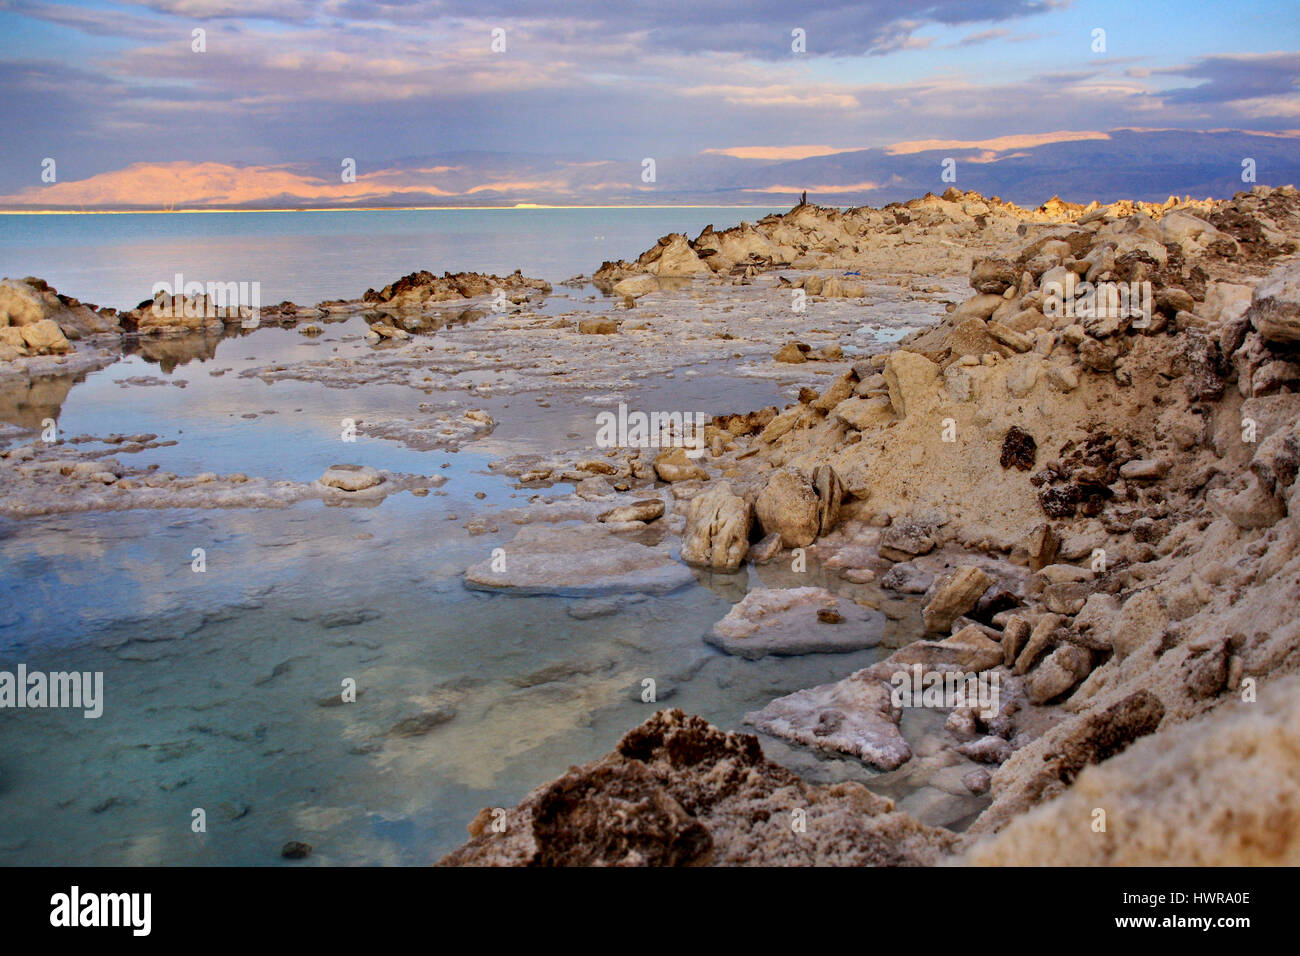 Sunset at the Dead sea, Israel Stock Photo